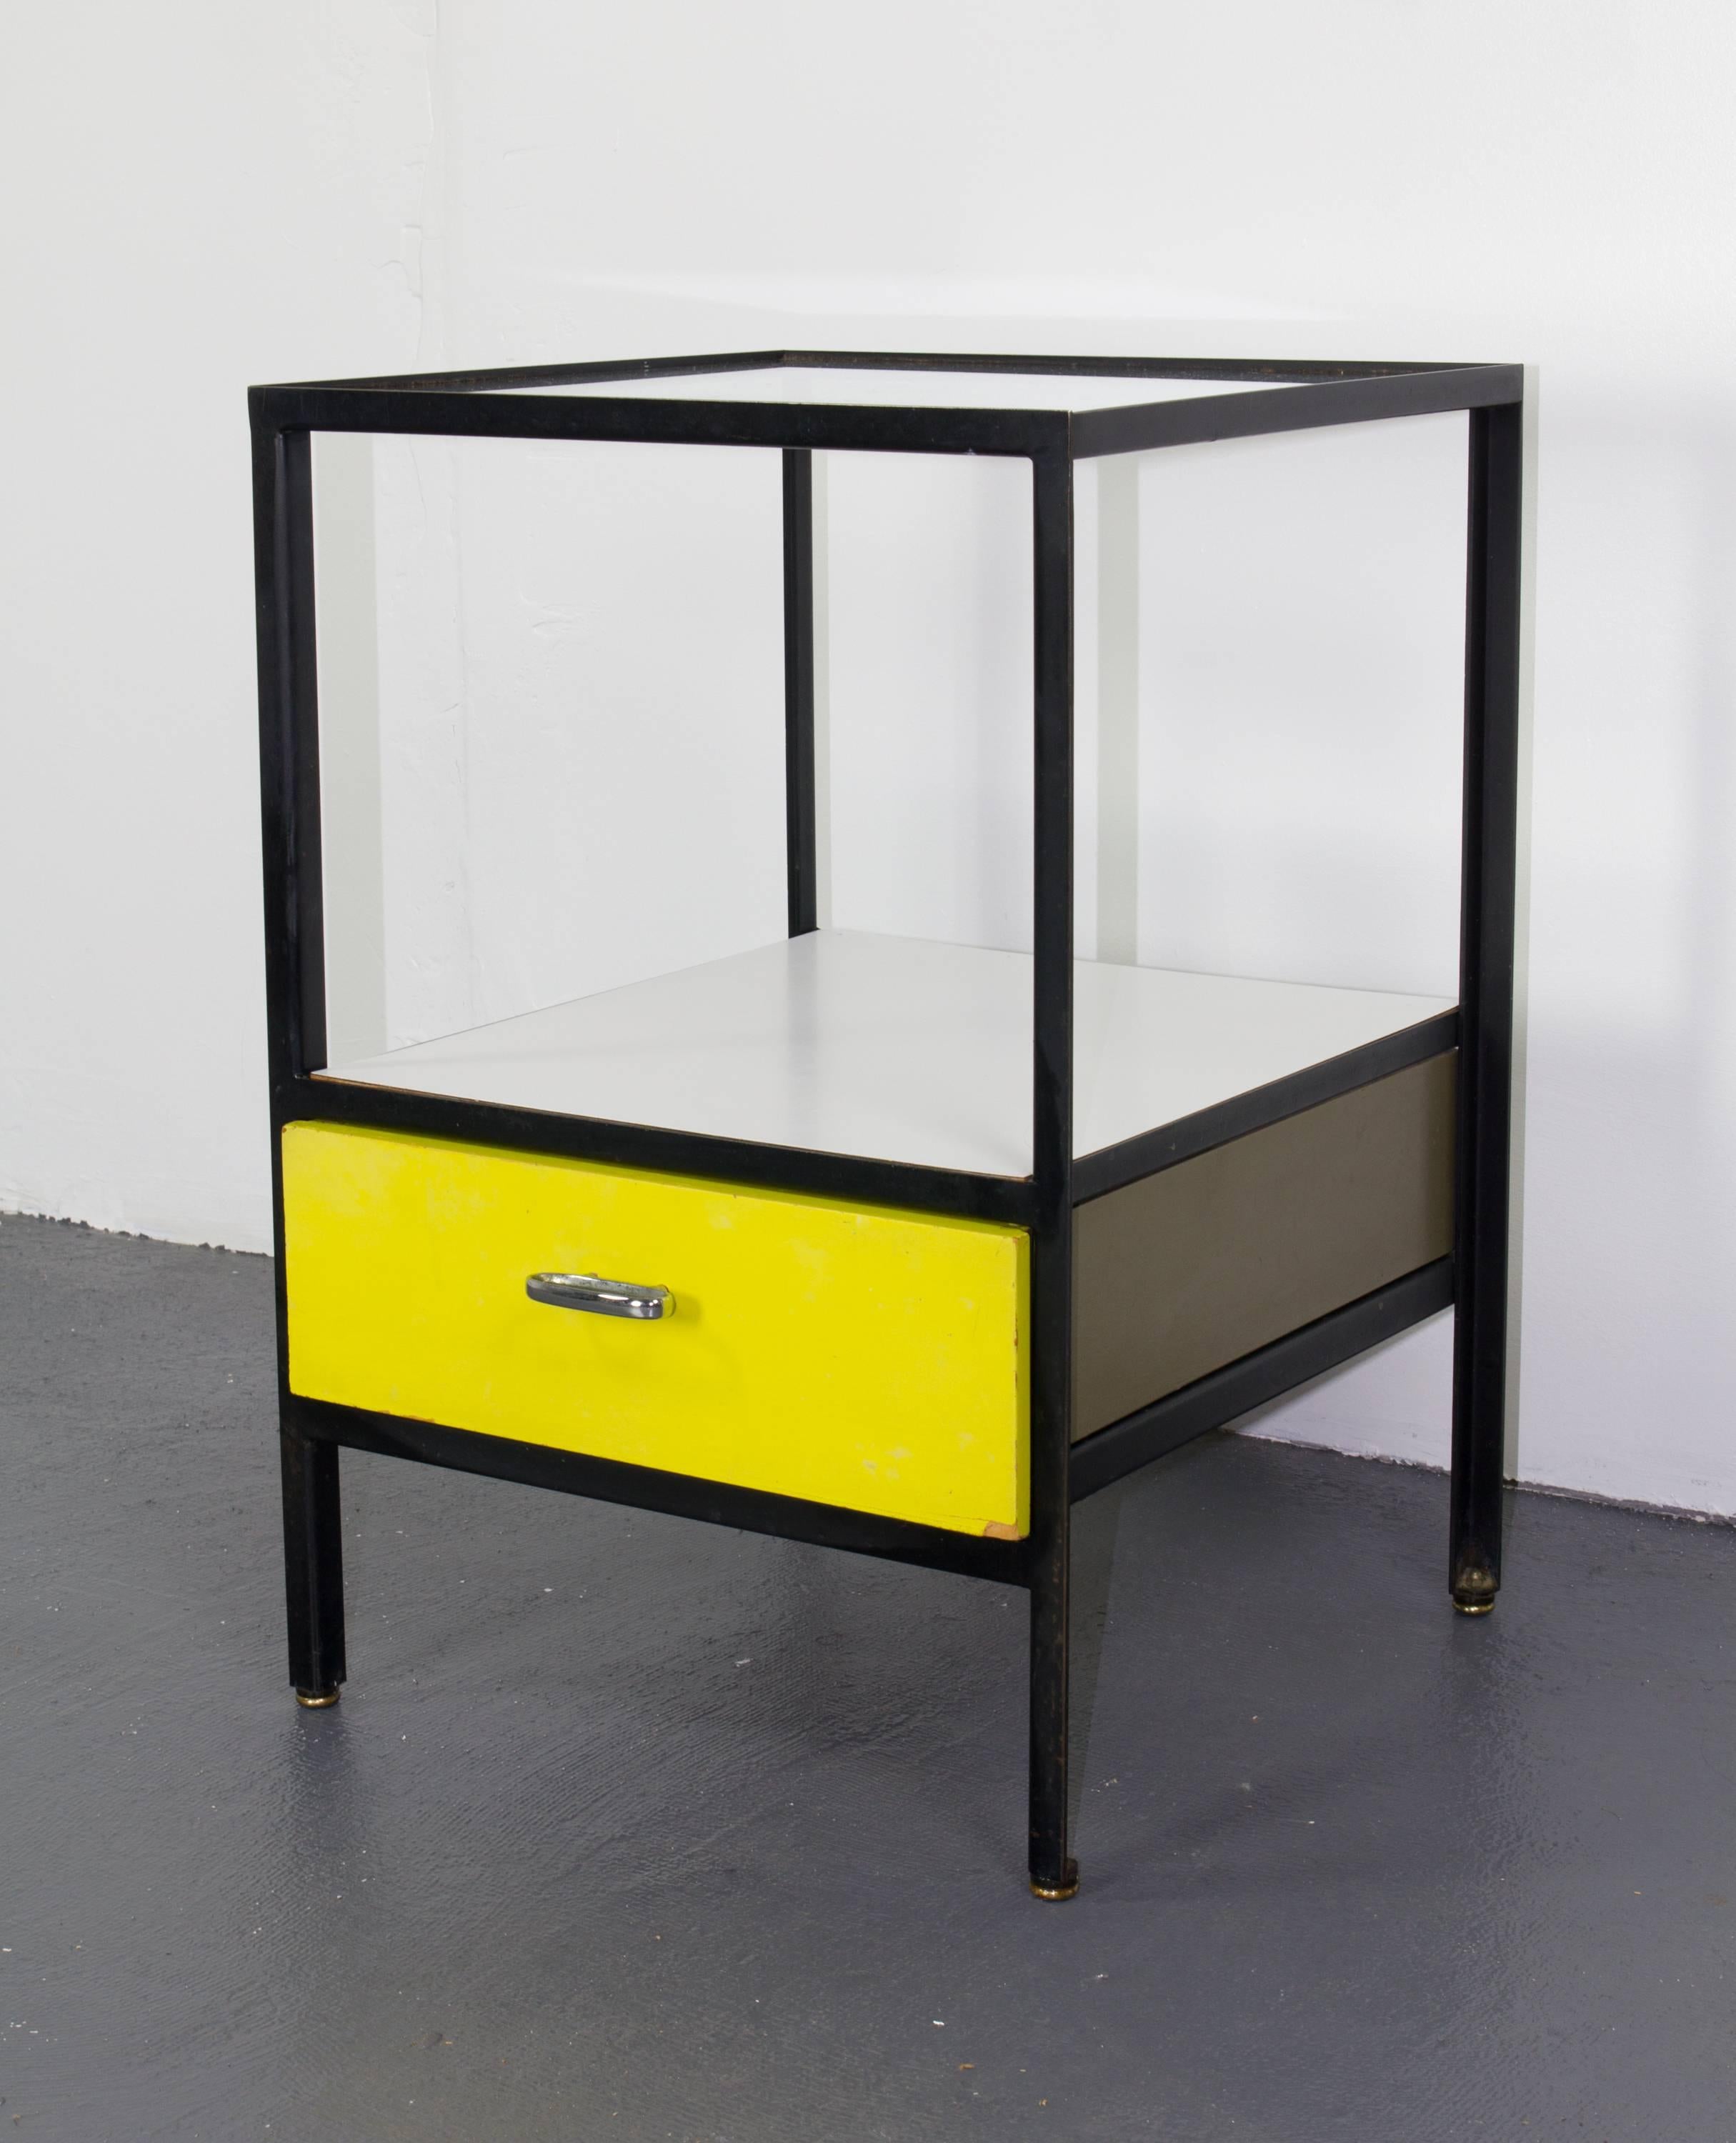 Pair of steel frame nightstands by George Nelson for Herman Miller with yellow lacquered wood drawers, framed in enameled steel with glass tabletops and white laminate lower shelves.